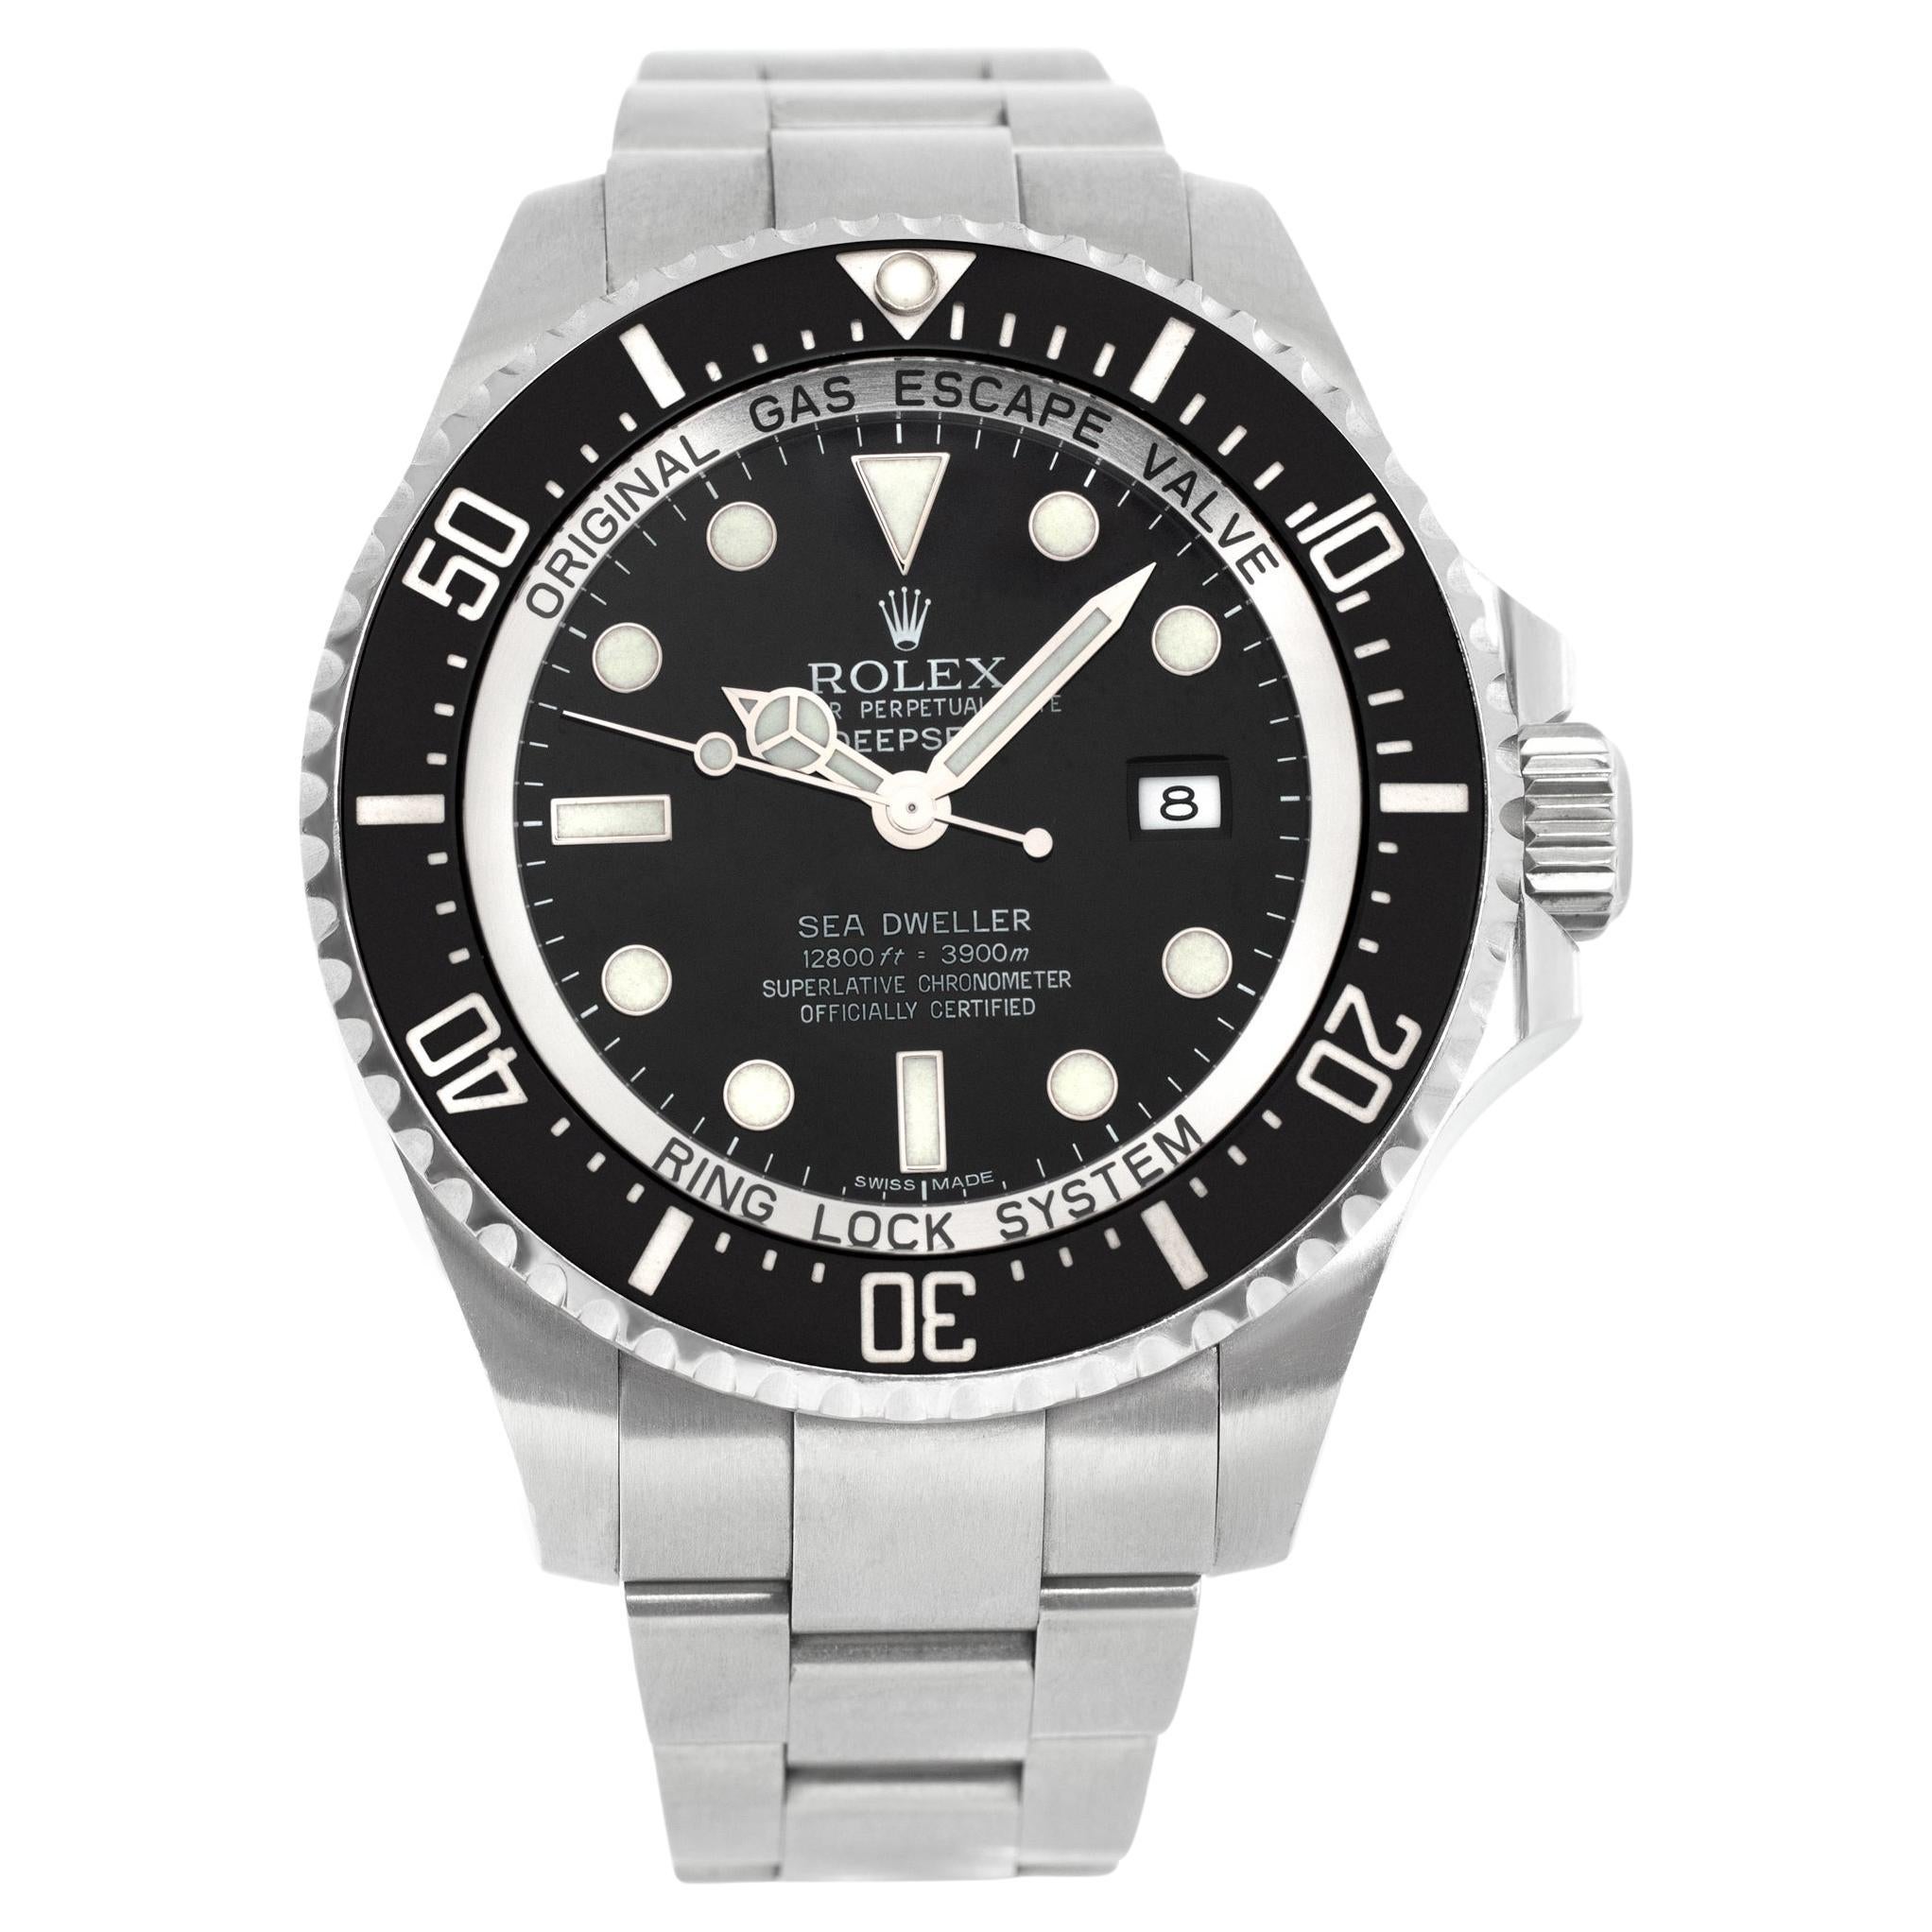 Rolex Sea-Dweller 116660 in stainless steel 44mm automatic watch